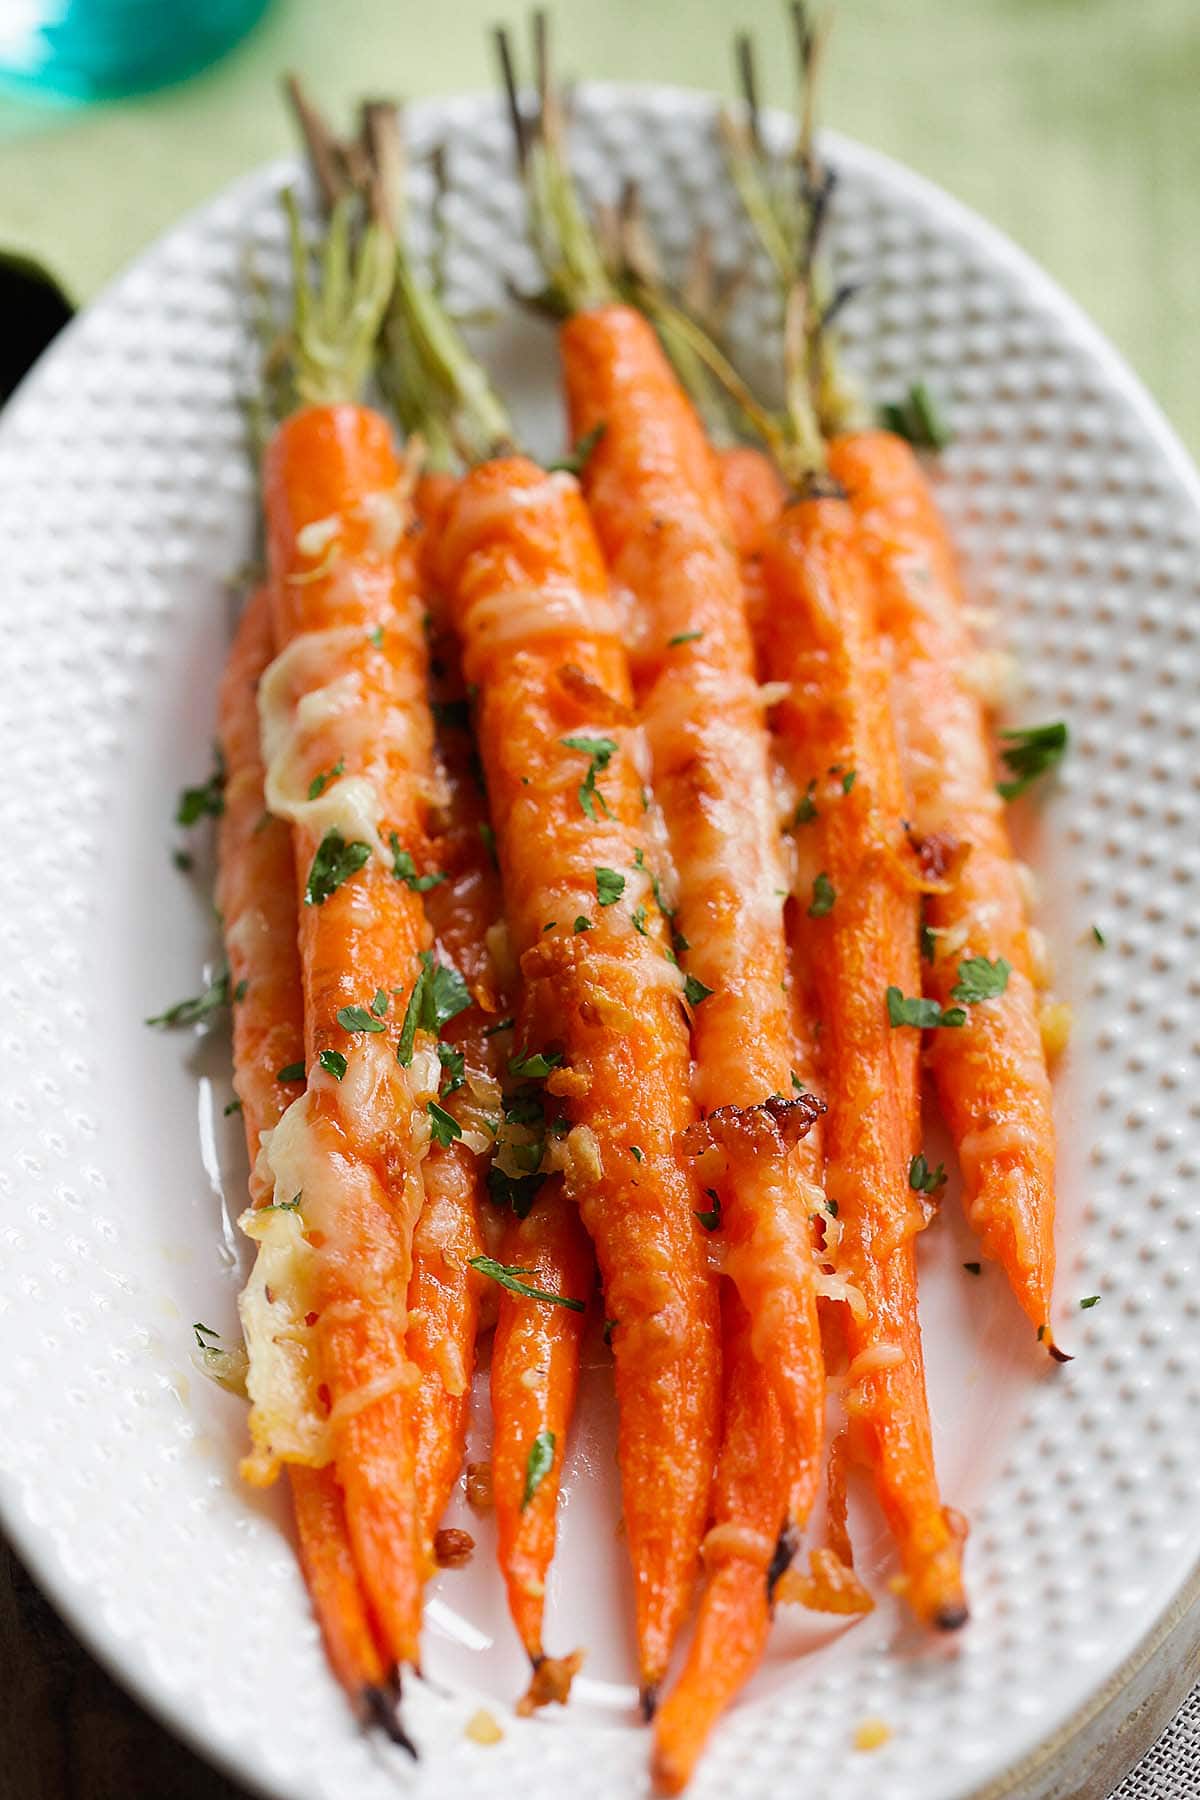 Garlic parmesan roasted carrot is one of the best savory carrot recipes.